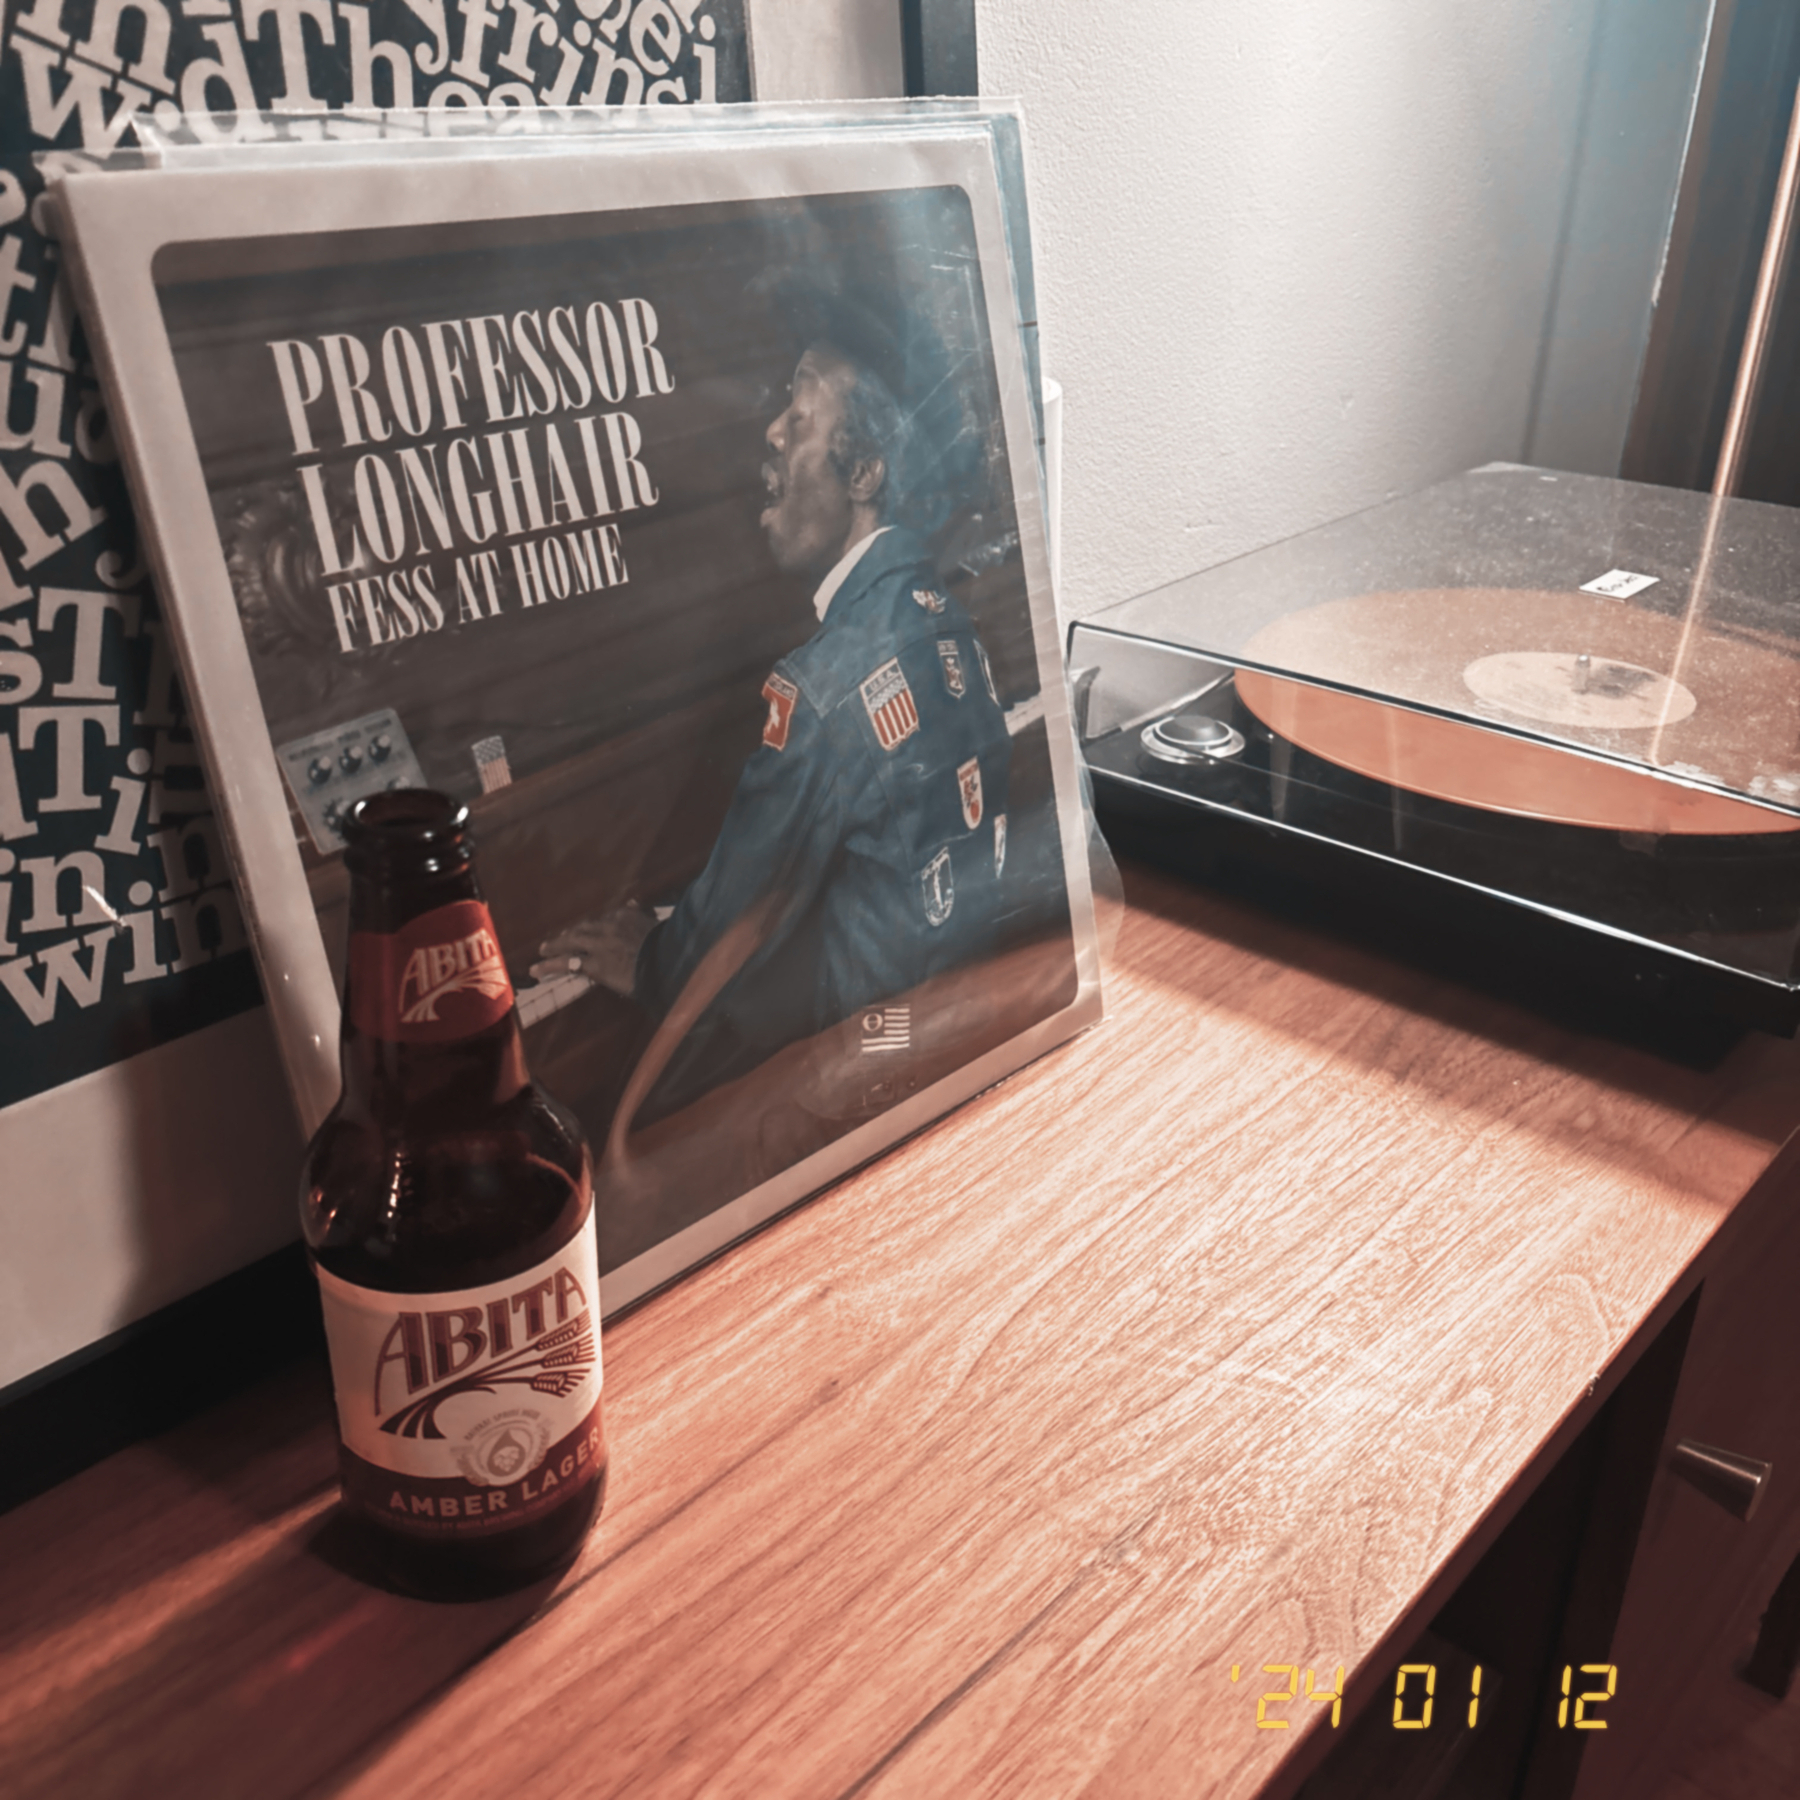 The album "Fess at Home" spinning on the record player with a strategically placed bottle of Anita Amber Lager. 